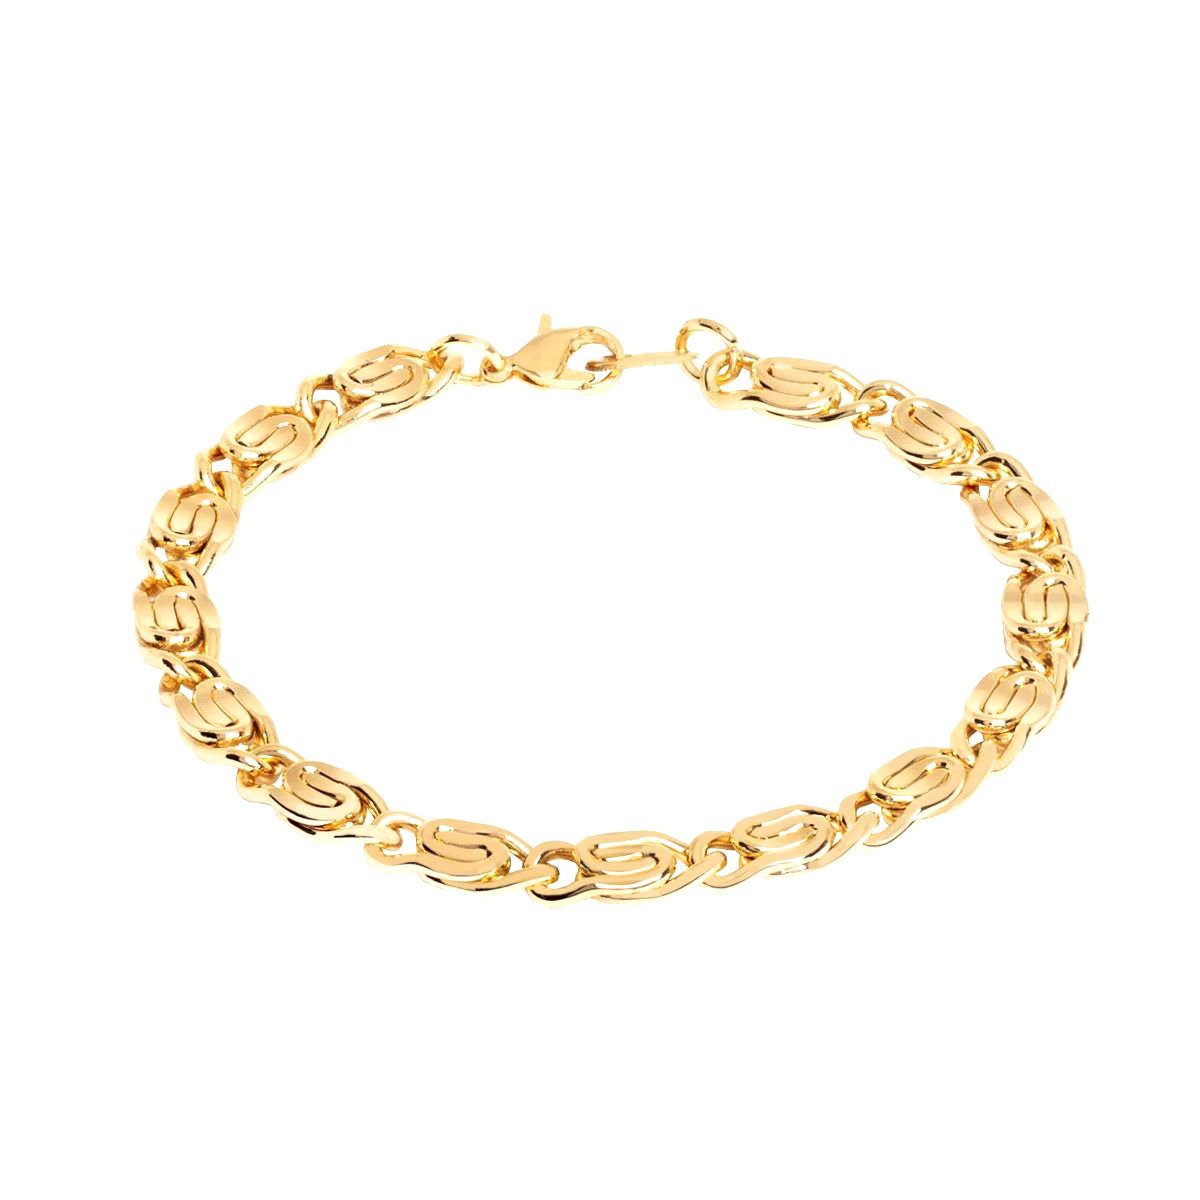 Golden And White Polished Ladies Plain Ring Chain Bracelet